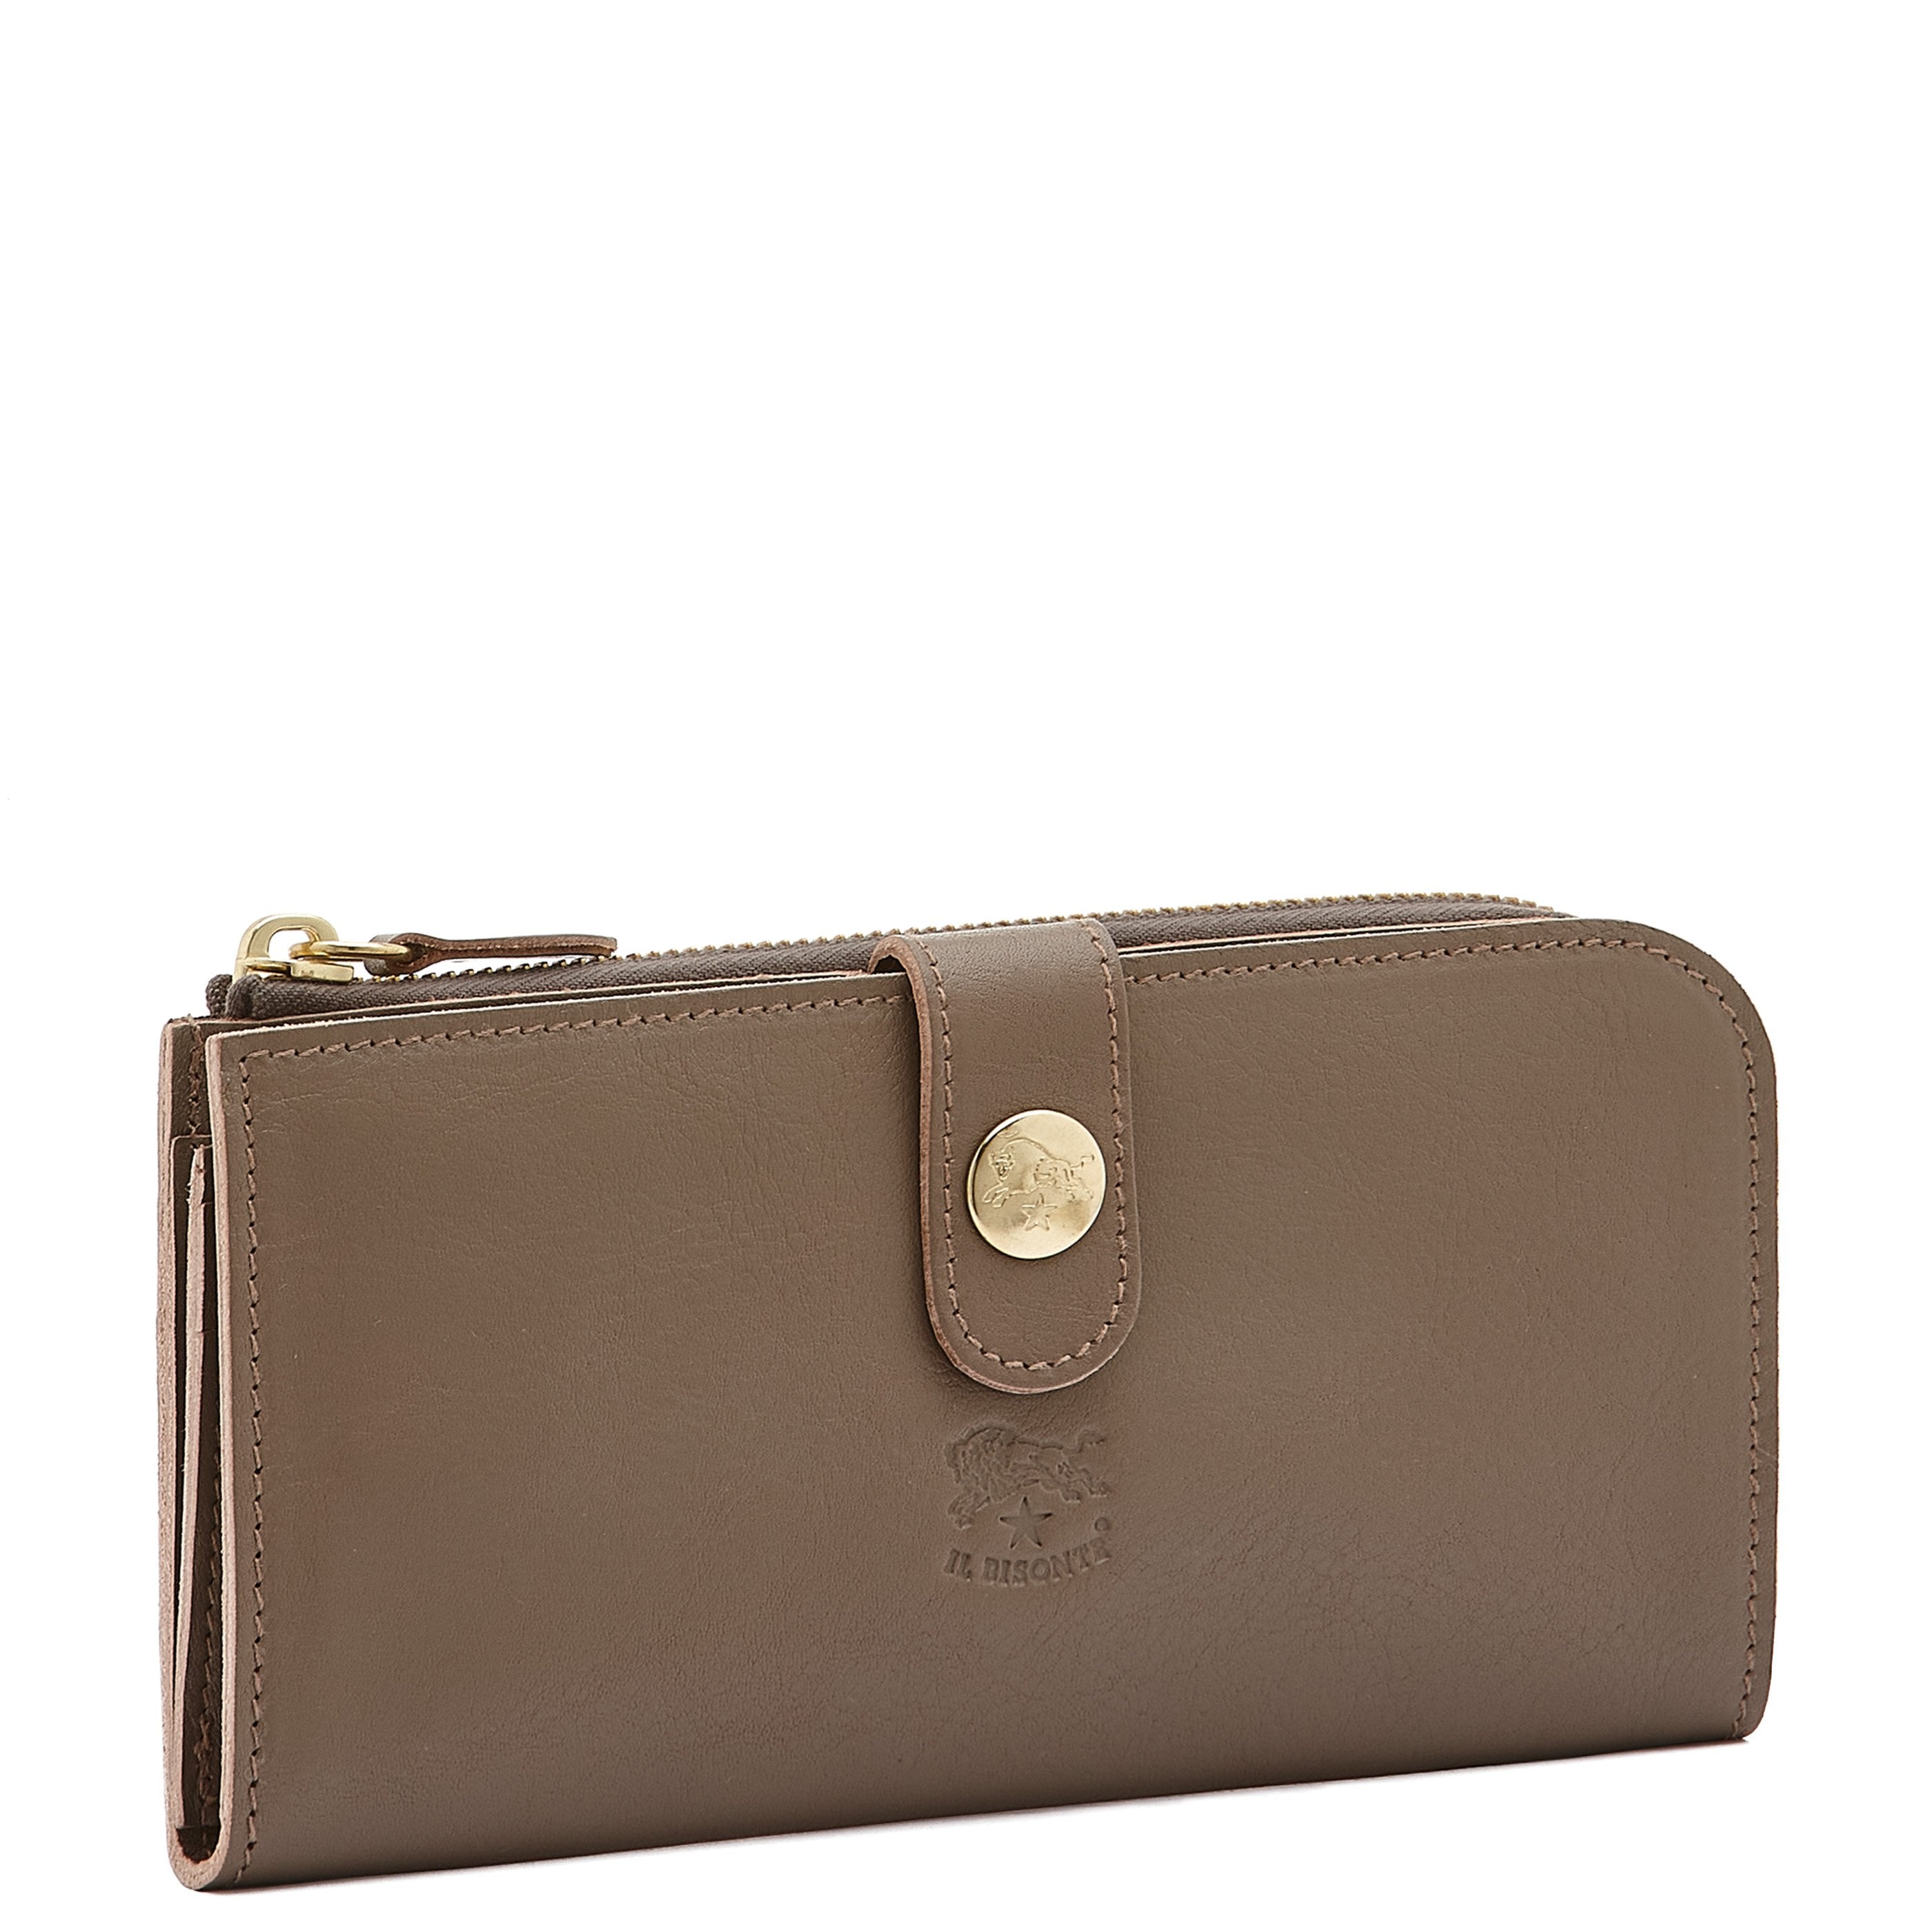 Women's continental wallet in calf leather color light grey